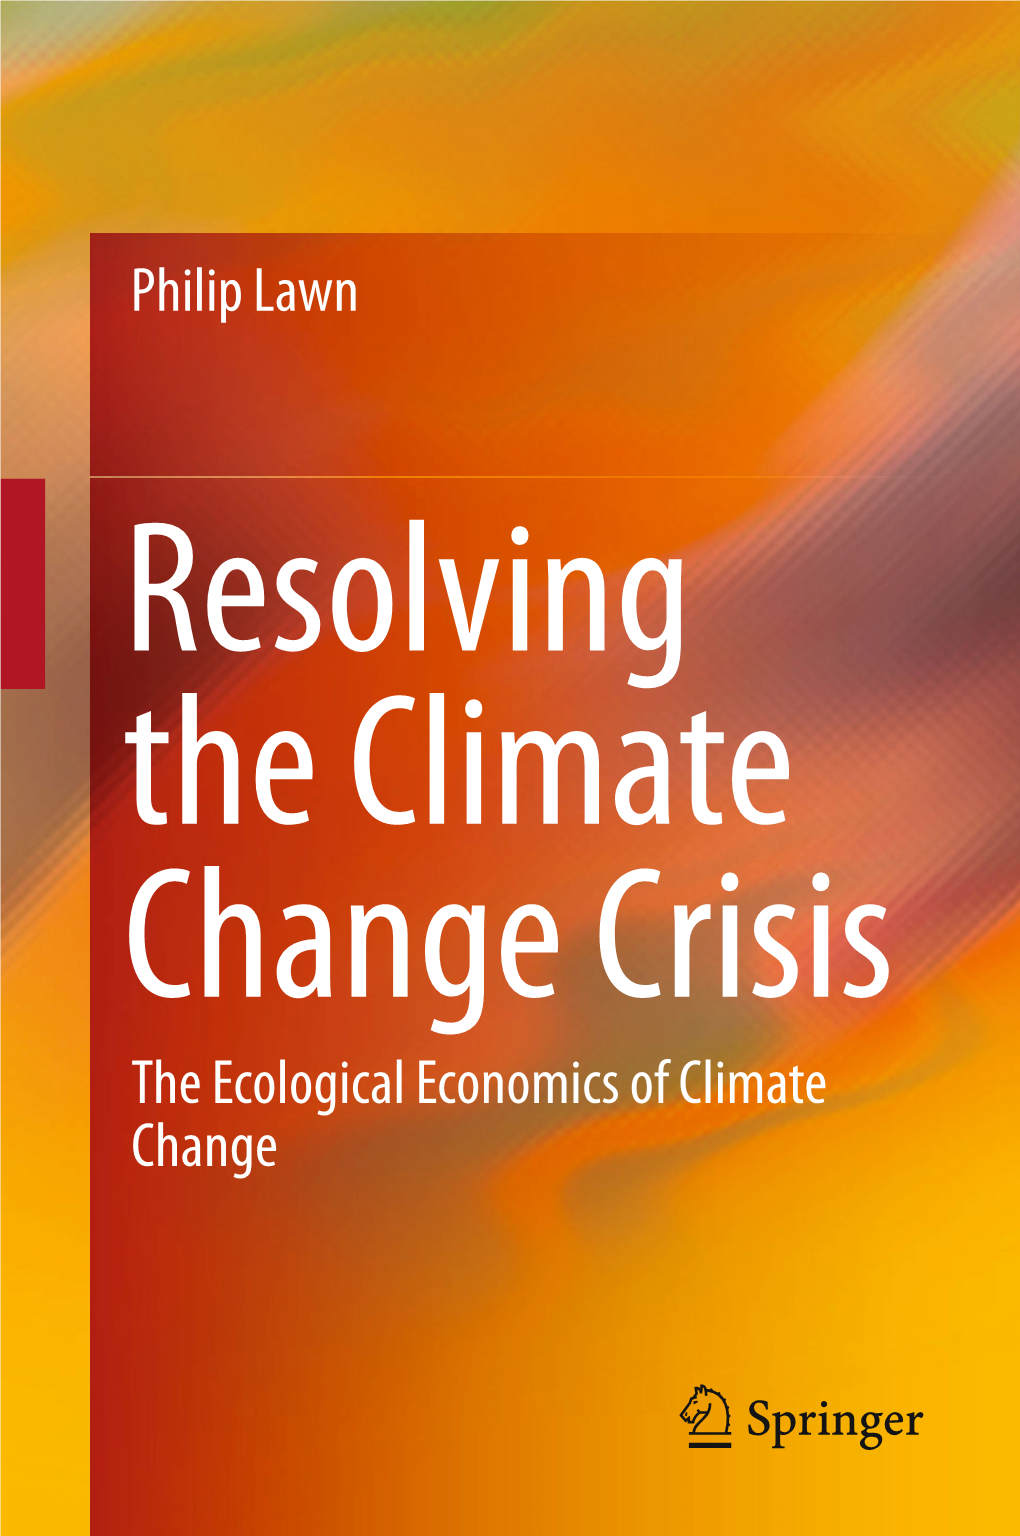 Philip Lawn the Ecological Economics of Climate Change